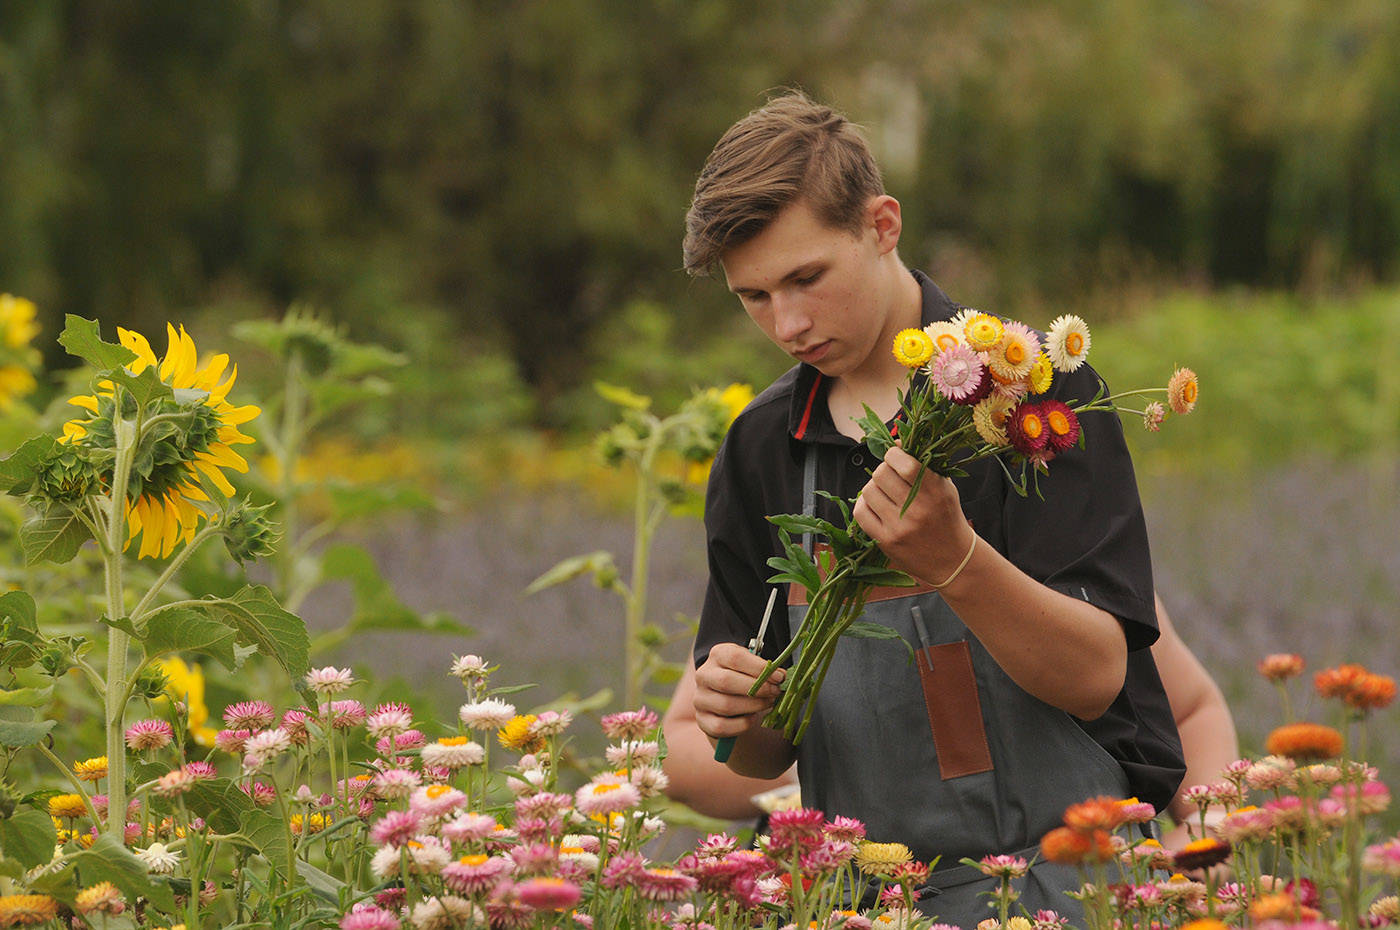 Owen Bosma snips flower for a bouquet at the Cultus Lake Flower Fest on opening day Saturday, July 17, 2021. (Jenna Hauck/ Chilliwack Progress)